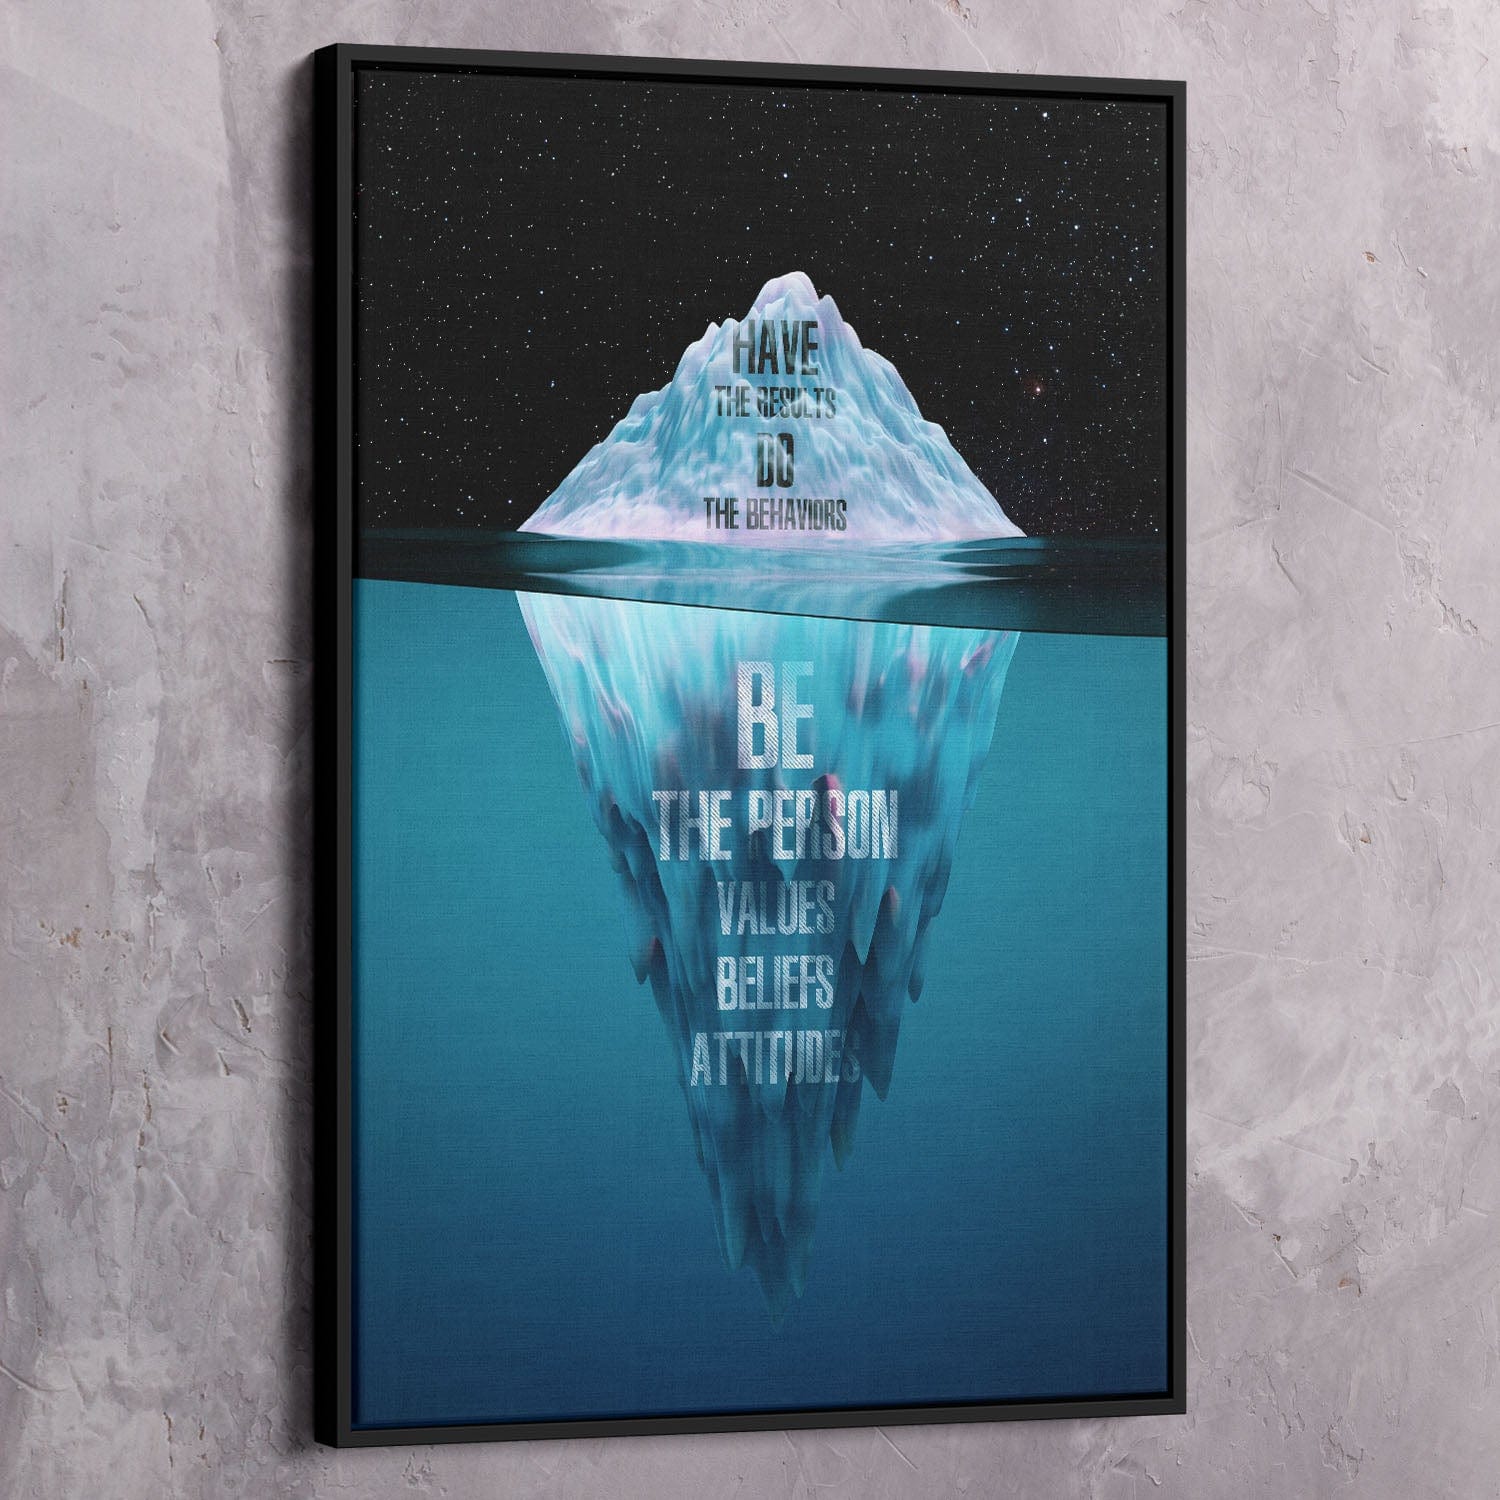 Be Do Have Iceberg Wall Art | Inspirational Wall Art Motivational Wall Art Quotes Office Art | ImpaktMaker Exclusive Canvas Art Portrait